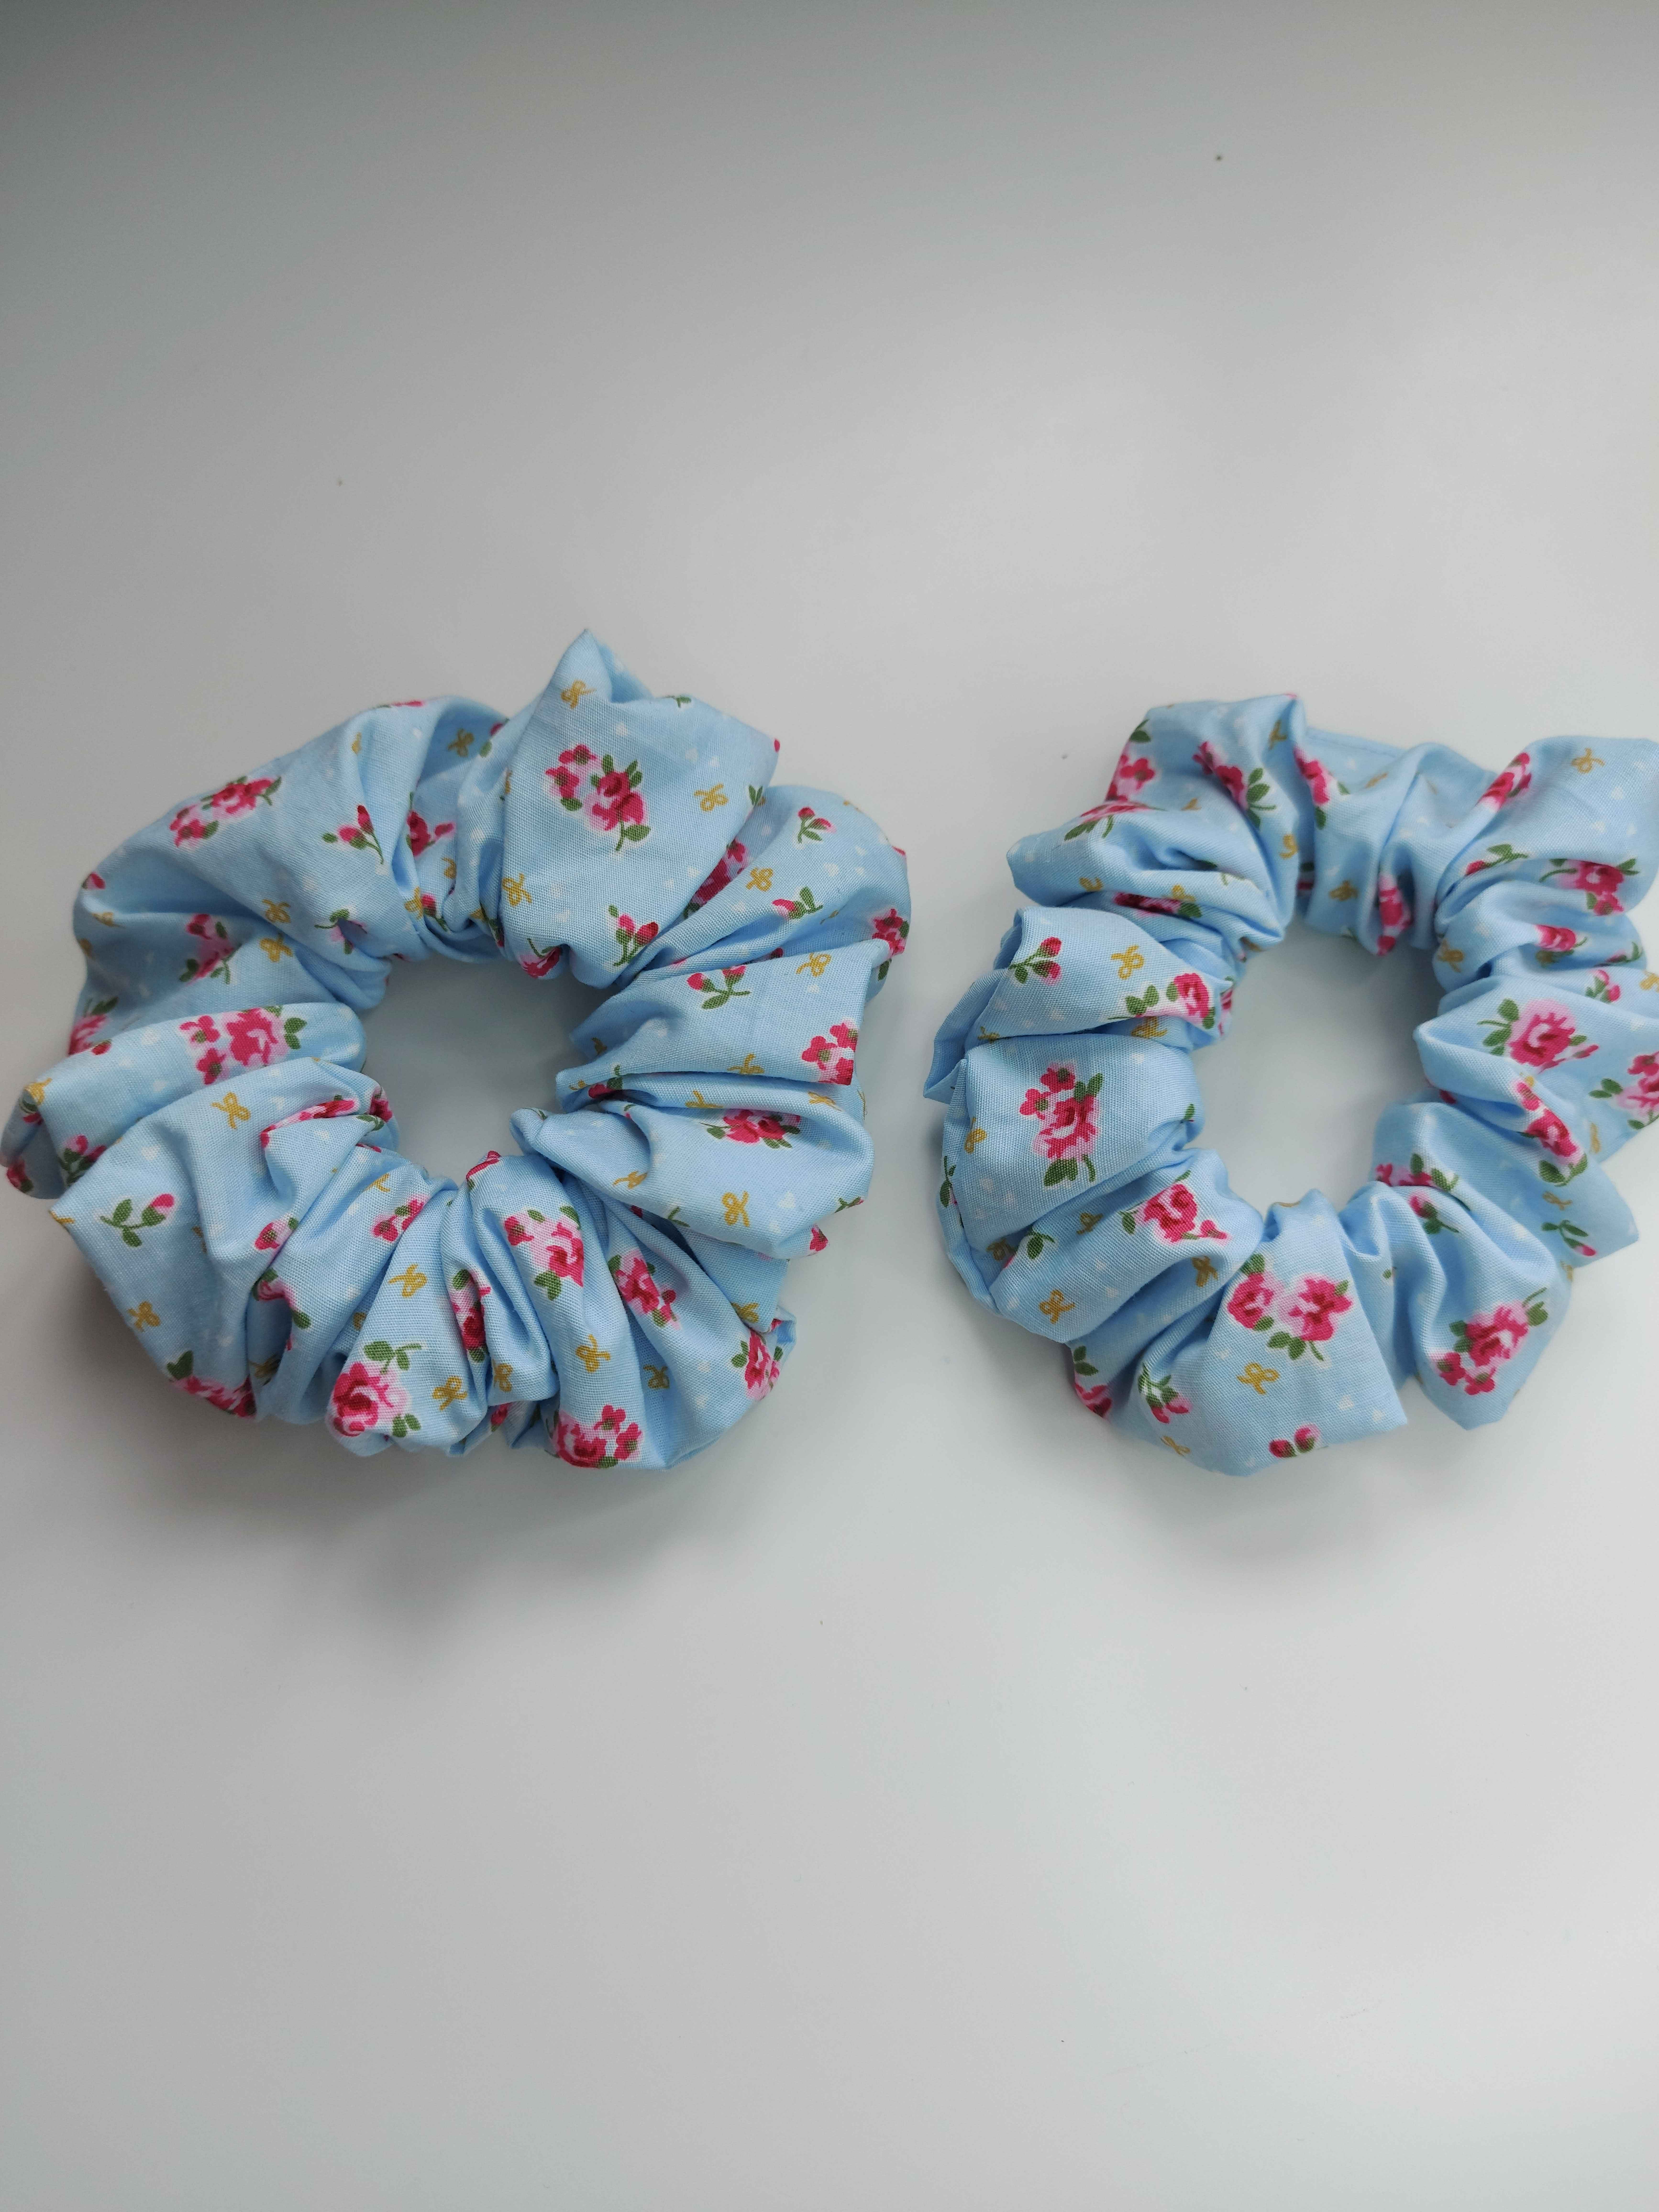 Chunky Mother's Day Scrunchies - Bunch of Flowers Collection - Handmade Hair Scrunchies - Pink, White, Blue